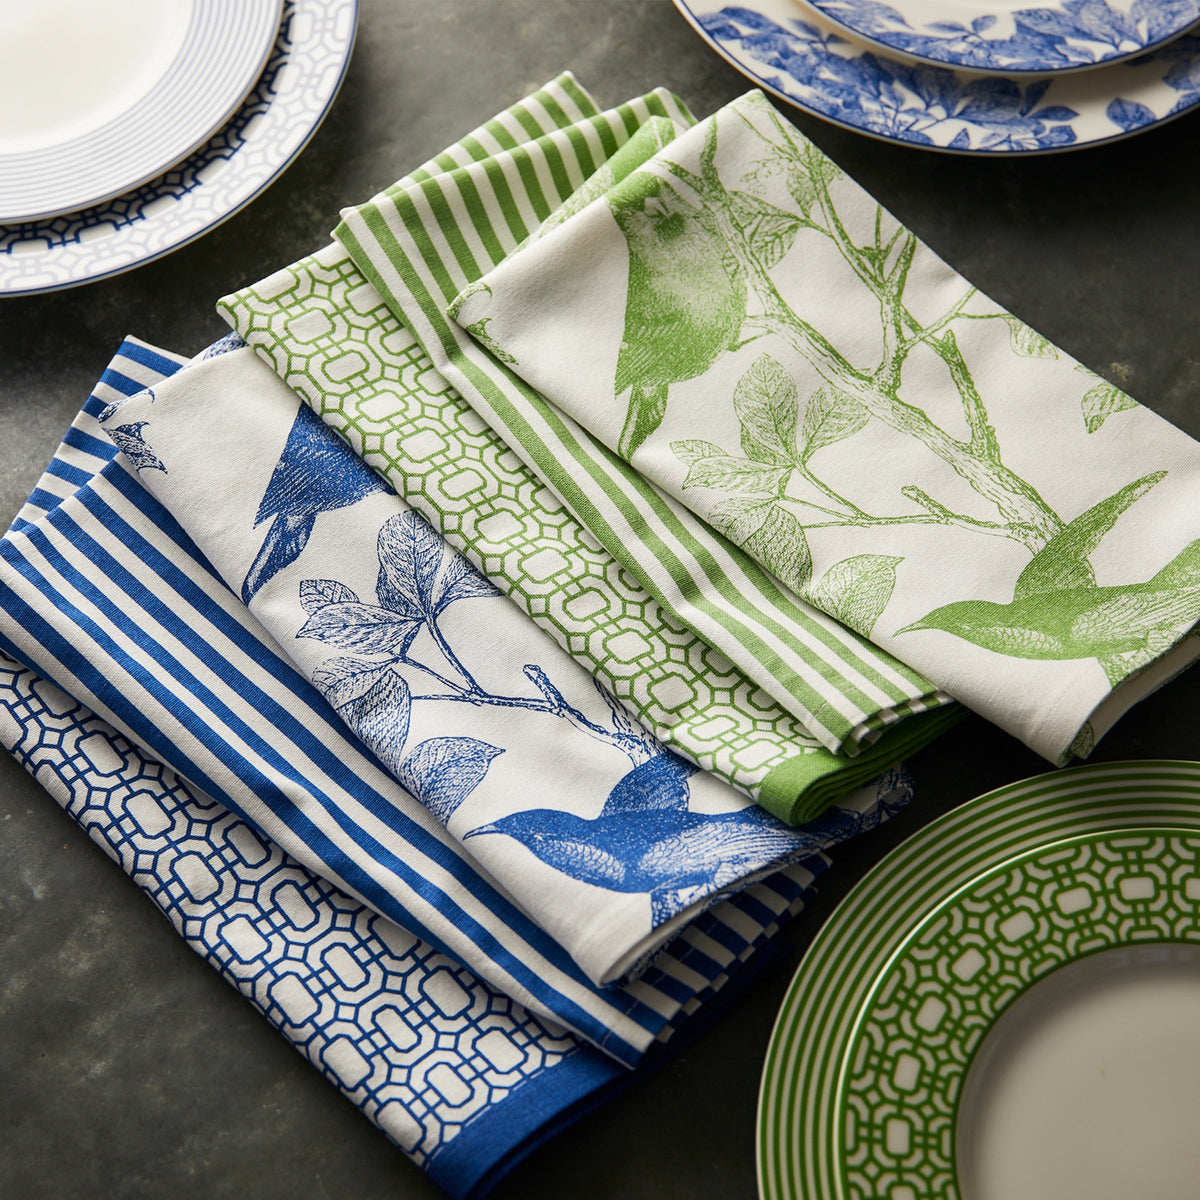 A set of Caskata Pinstripe Dinner Napkins in Green Set/4 on a table.